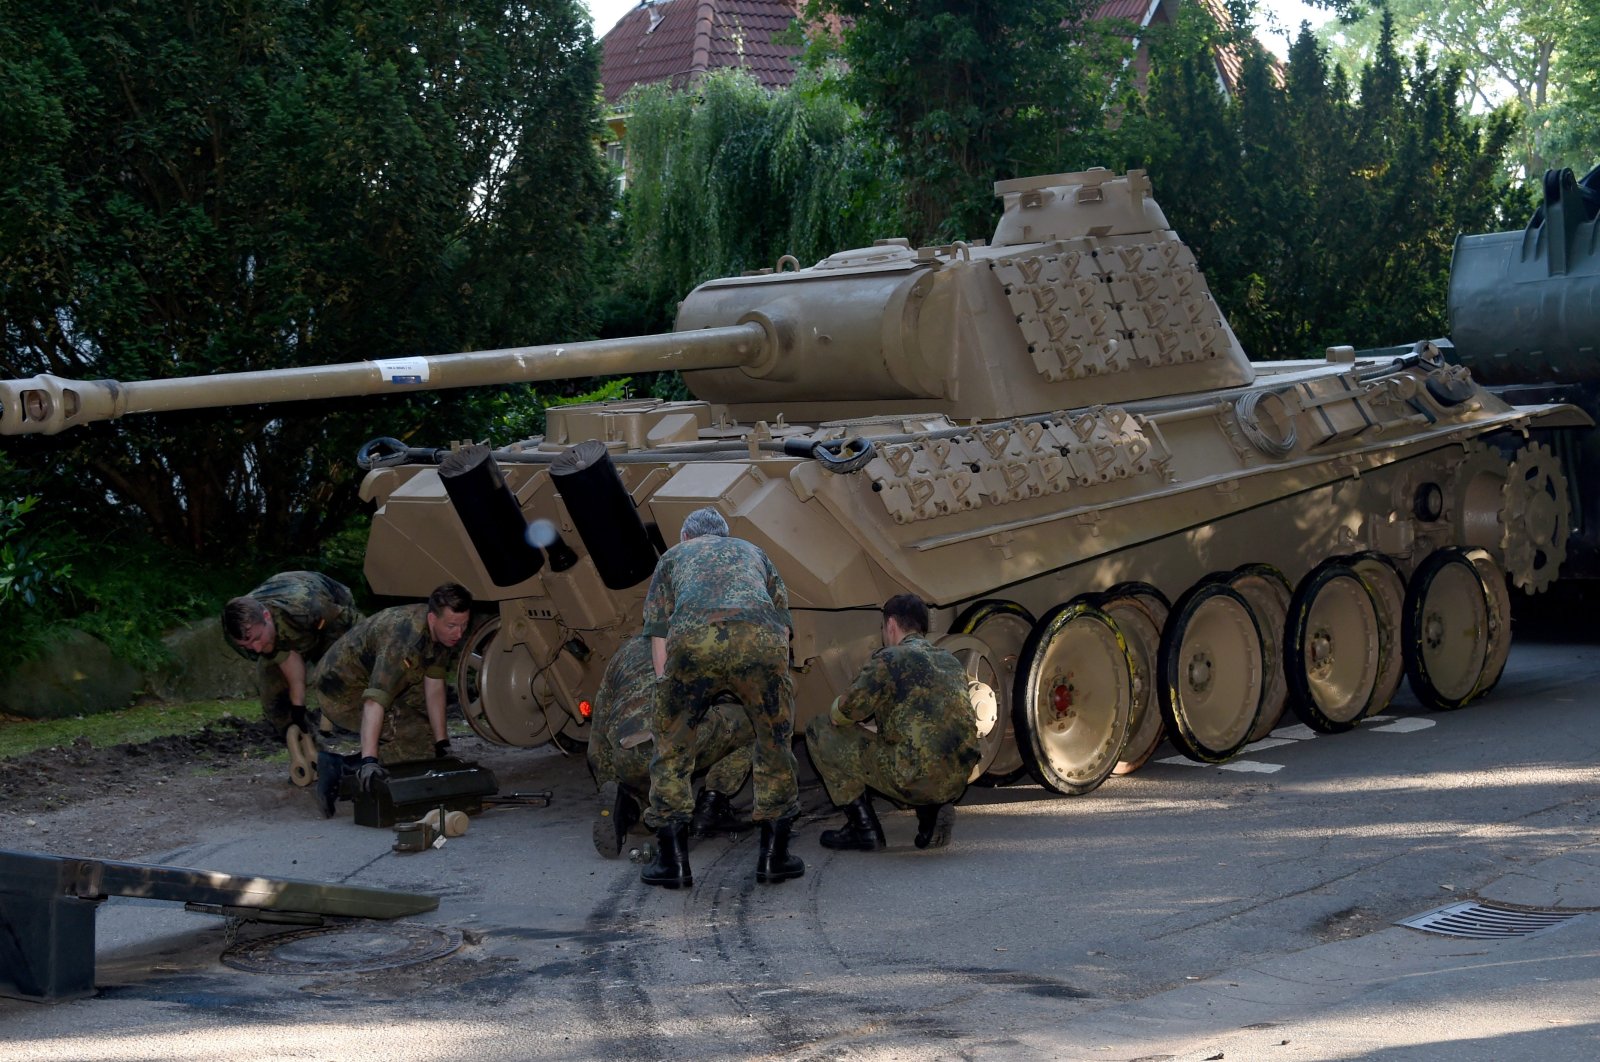 A World War II-era Panther tank is prepared for transportation from a residential property in Heikendorf, northern Germany, July 2, 2015. (AP Photo)